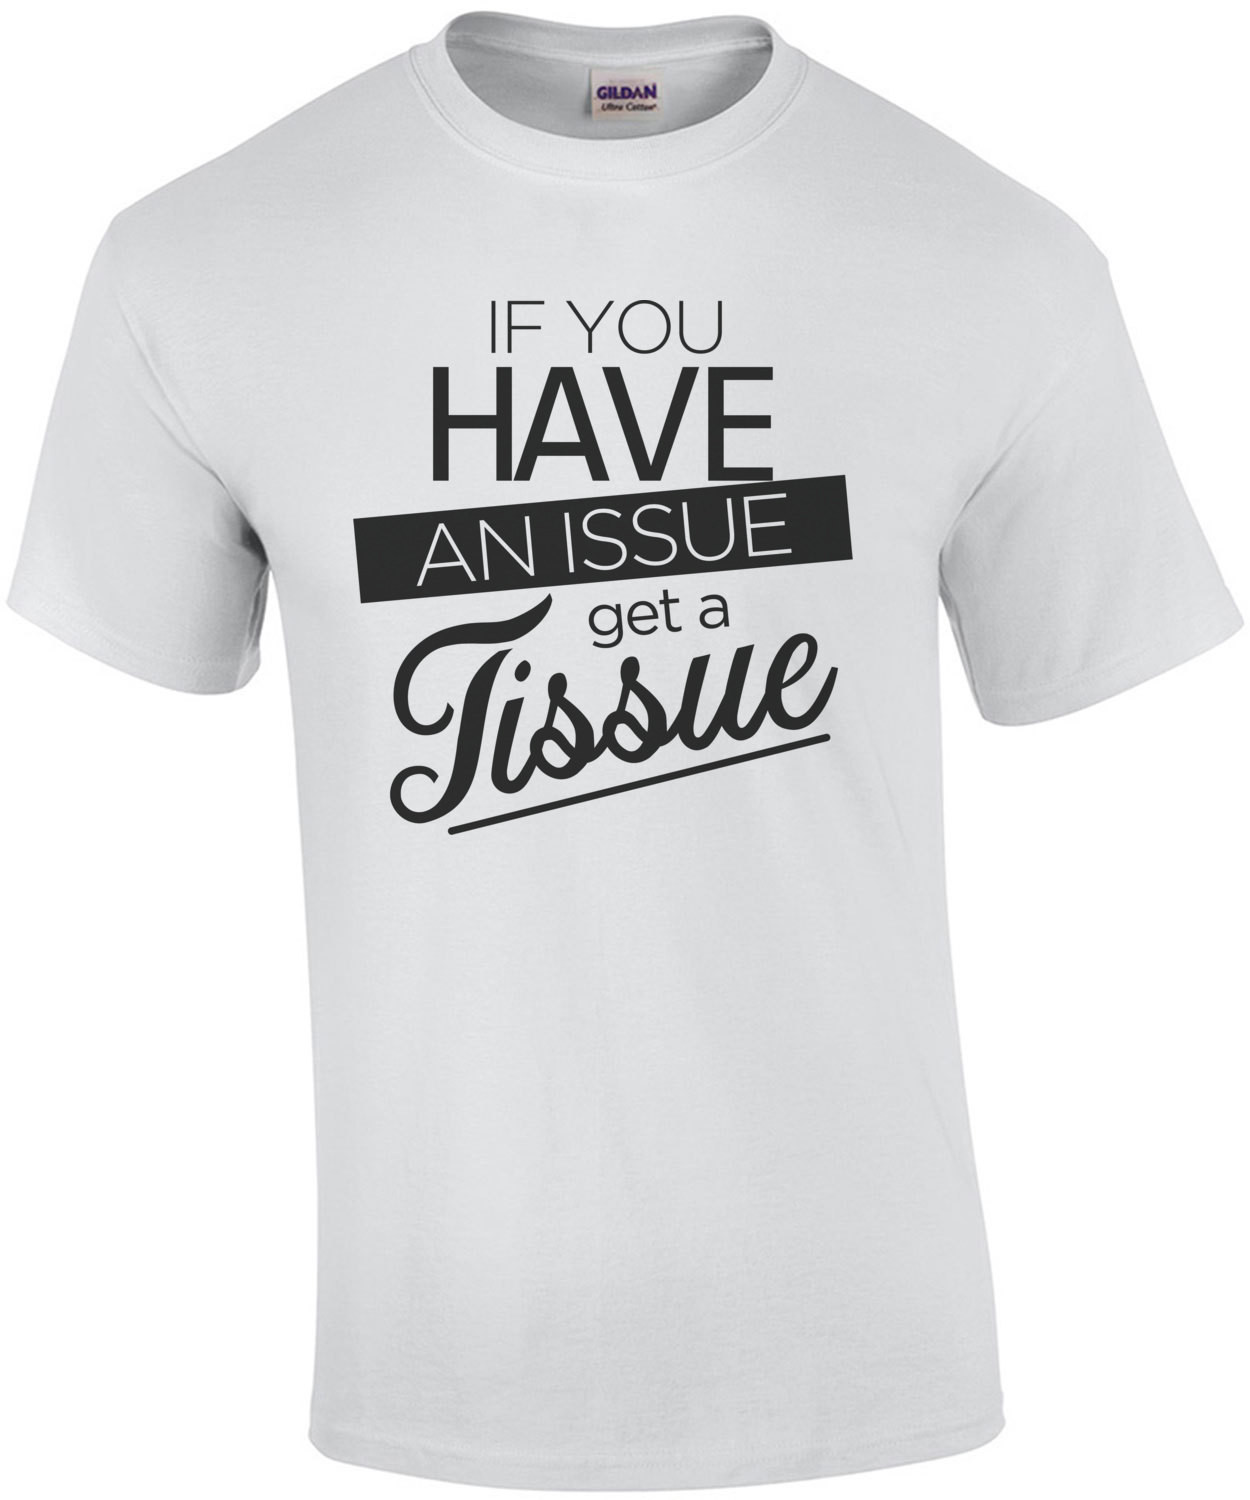 If you have an issue get a tissue - funny t-shirt